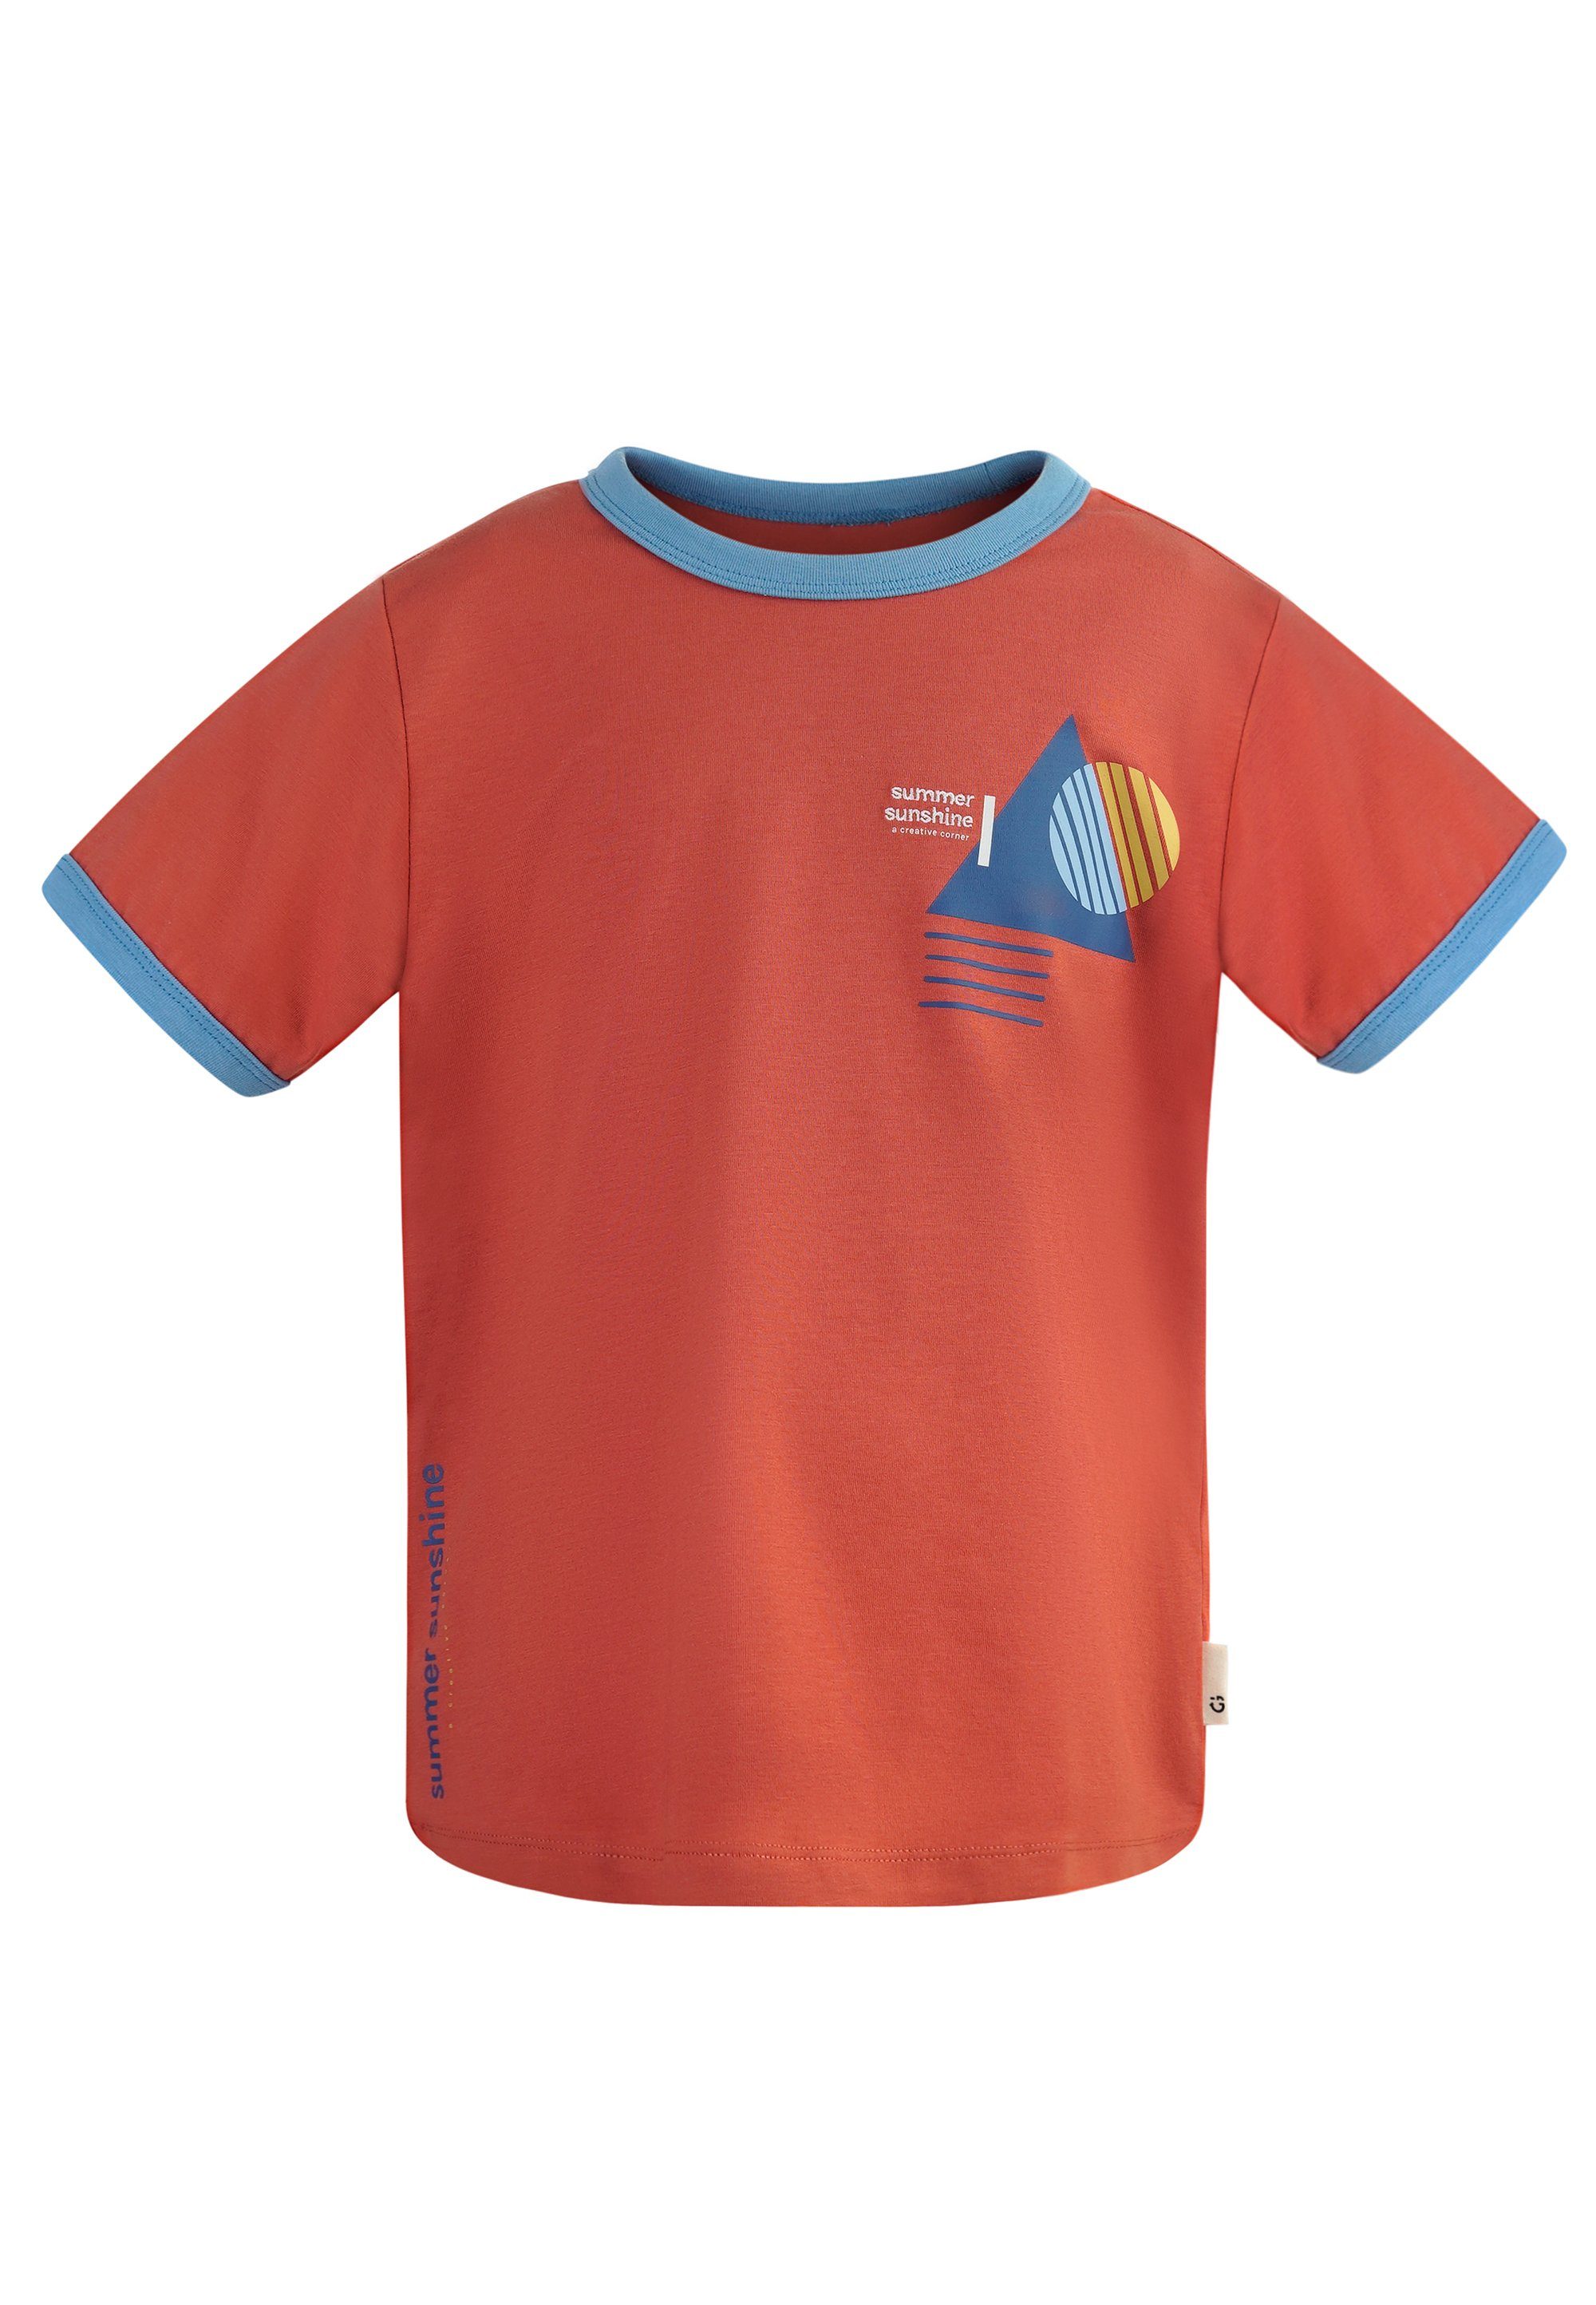 GIORDANO junior T-Shirt Cool-Touch-Funktion Sorena mit angenehmer